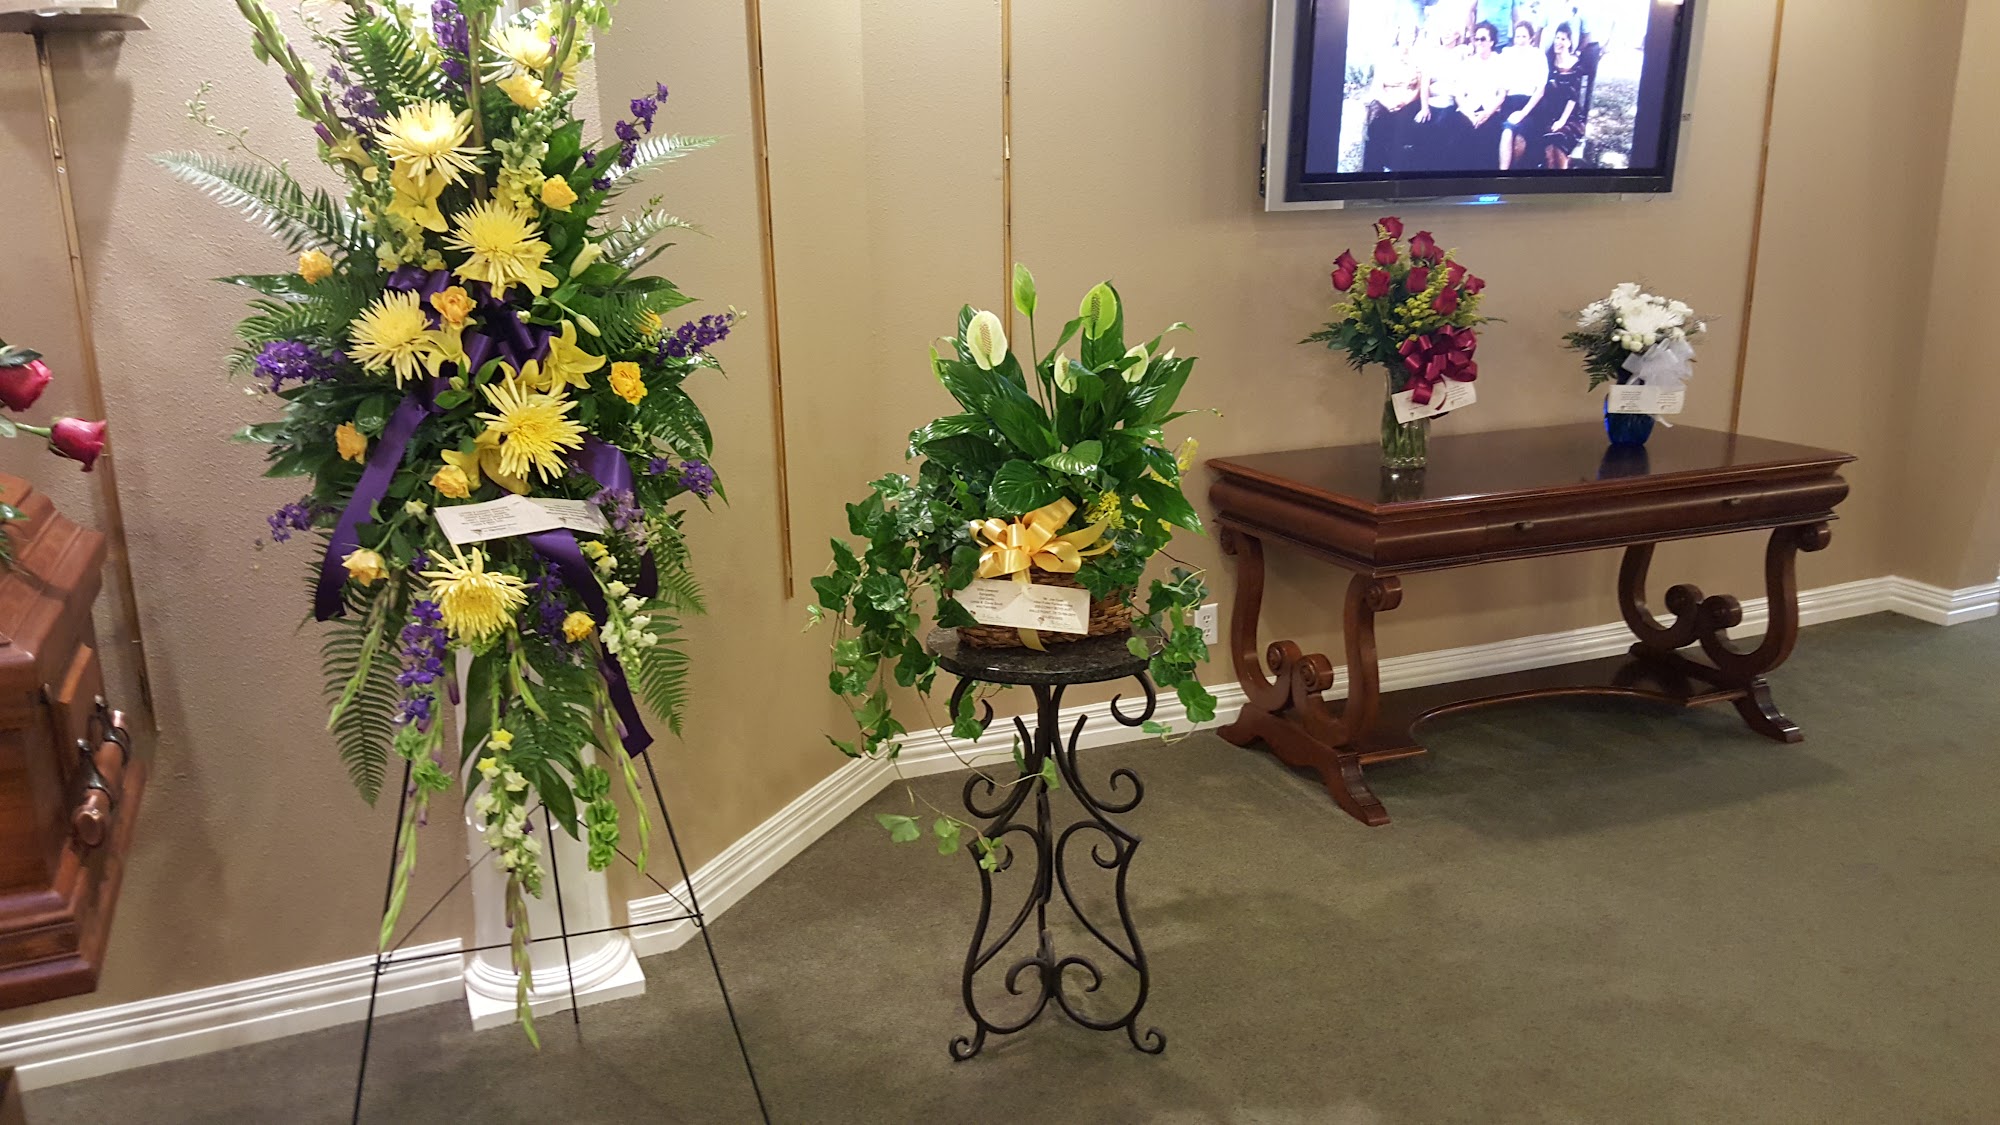 Allan Fuller Funeral Home 205 Corky Boyd Ave, Wills Point Texas 75169